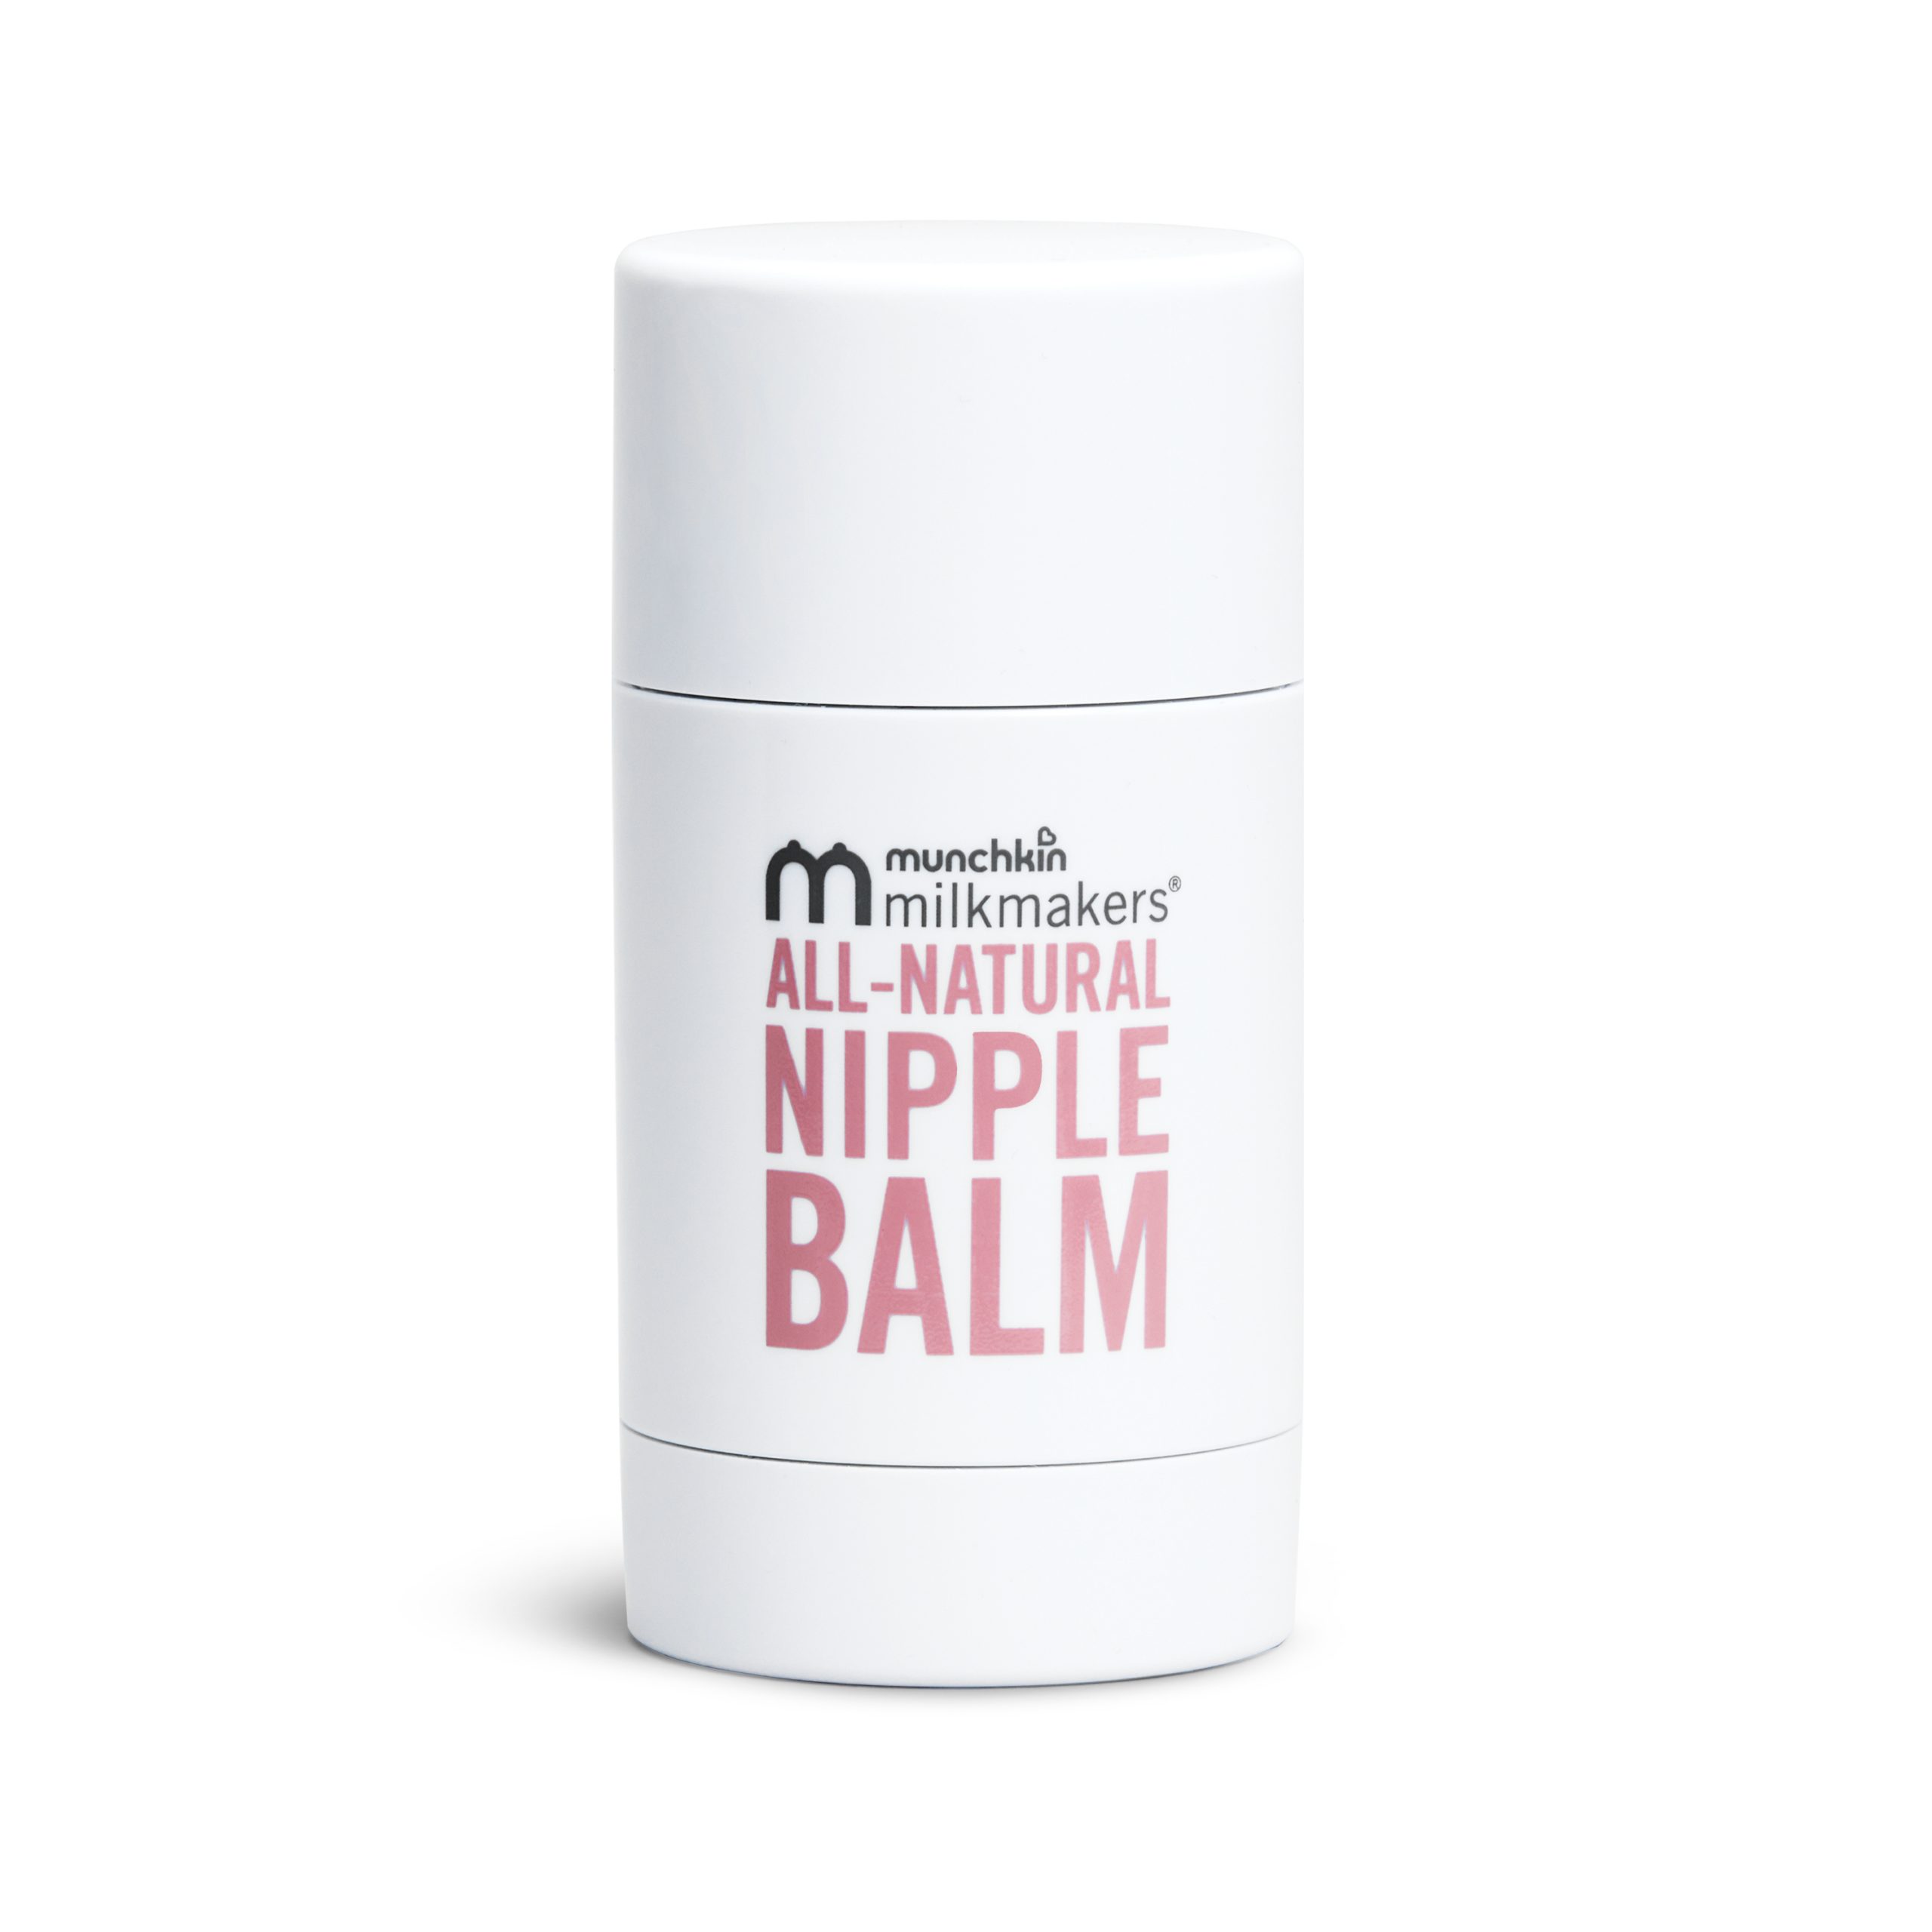 Milkmakers All-Natural Nipple Balm